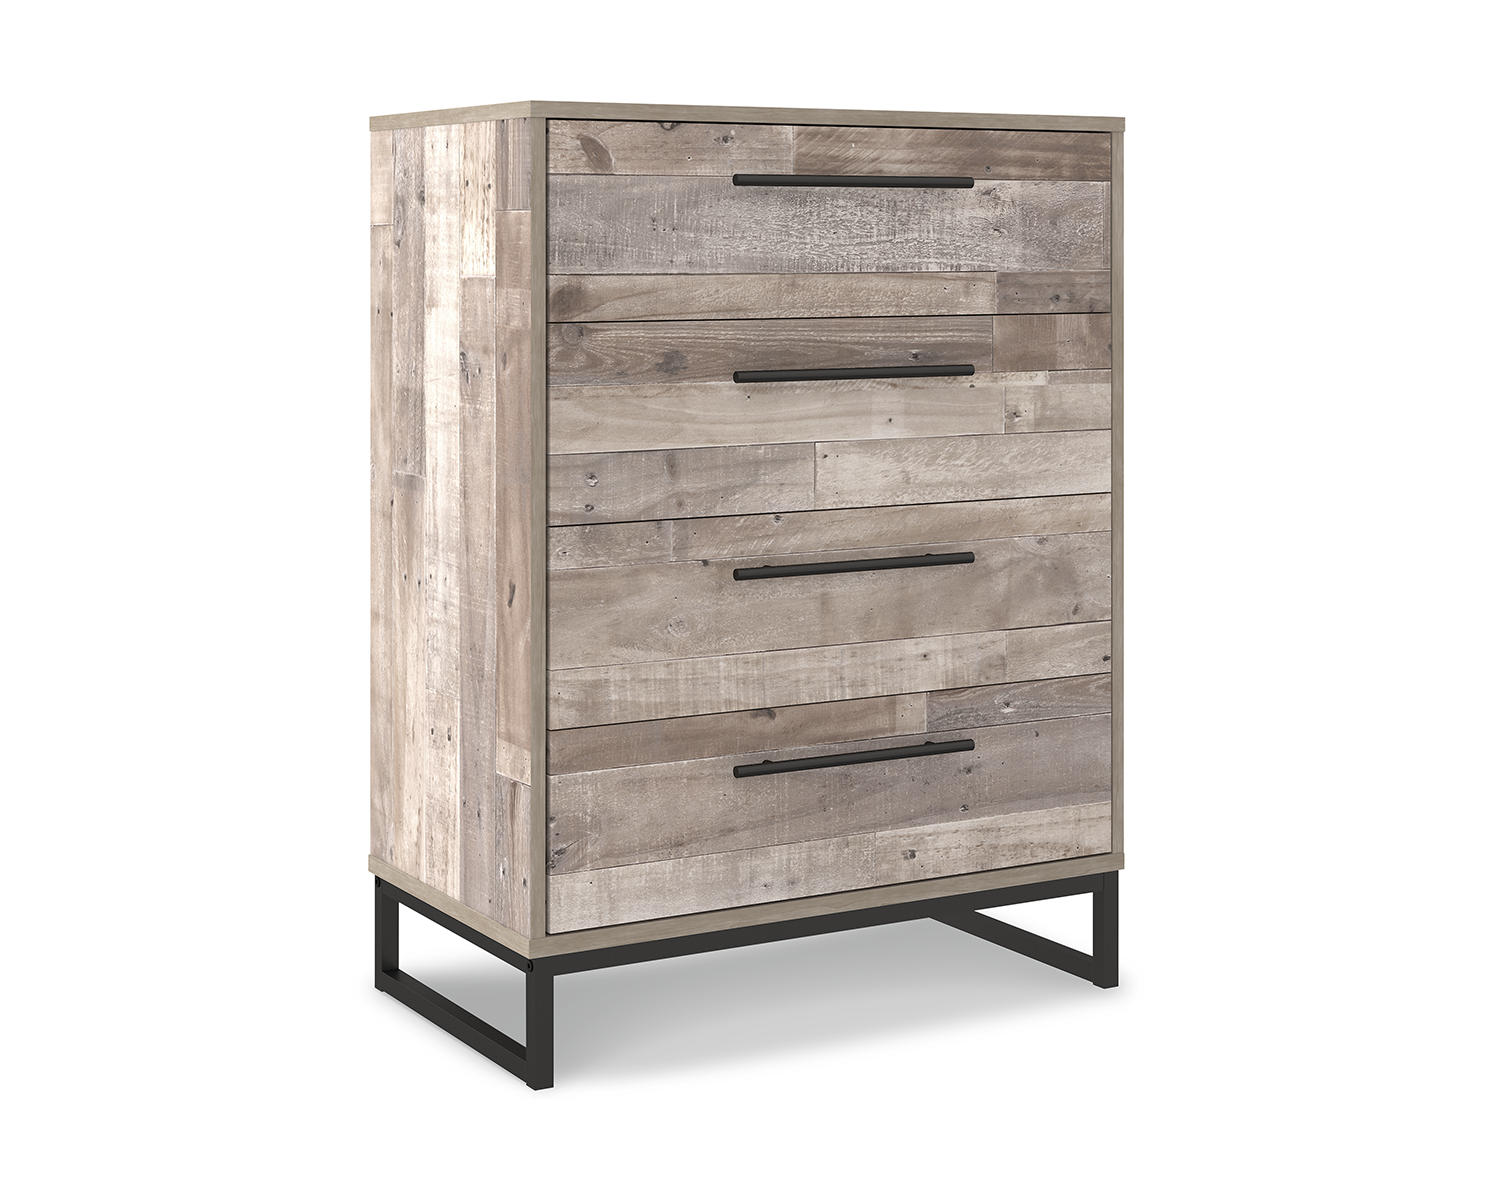 Signature Design by Ashley Neilsville Industrial 4 Drawer Chest of Drawers, Whitewash - image 2 of 8